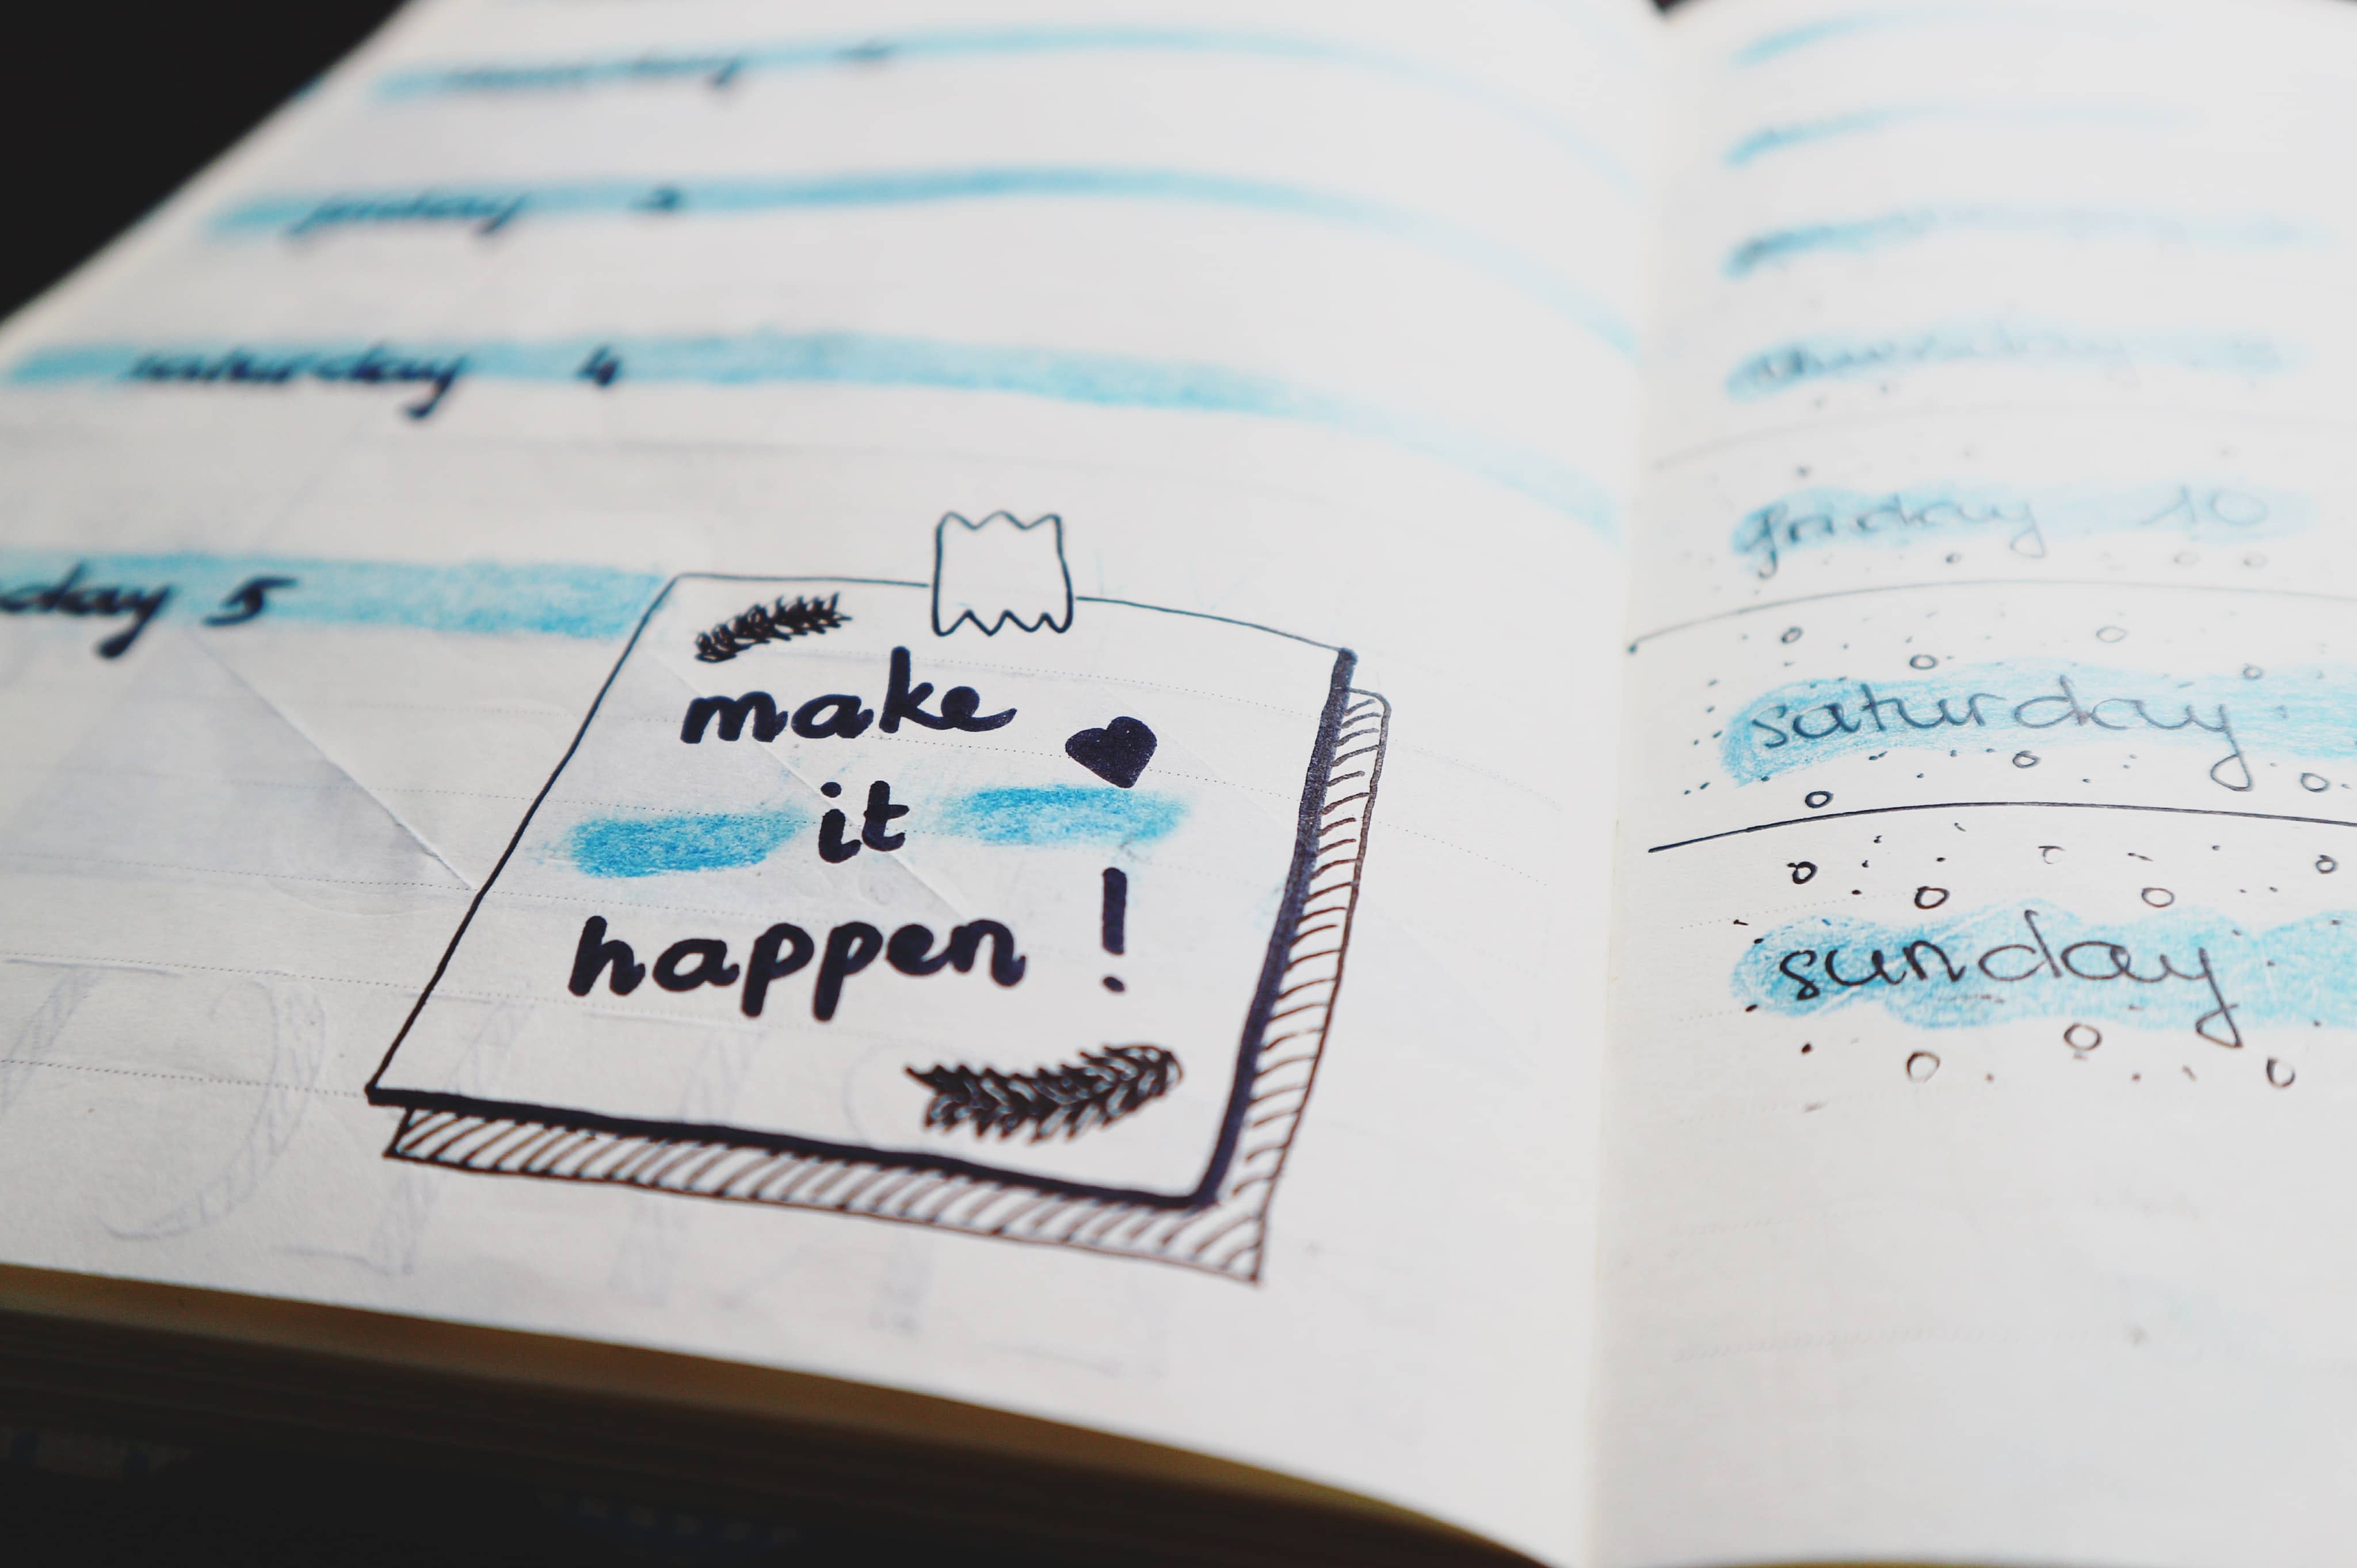 Open wedding planning planner with motivational quote "make it happen!" and hand-drawn calendar for Friday to Sunday.